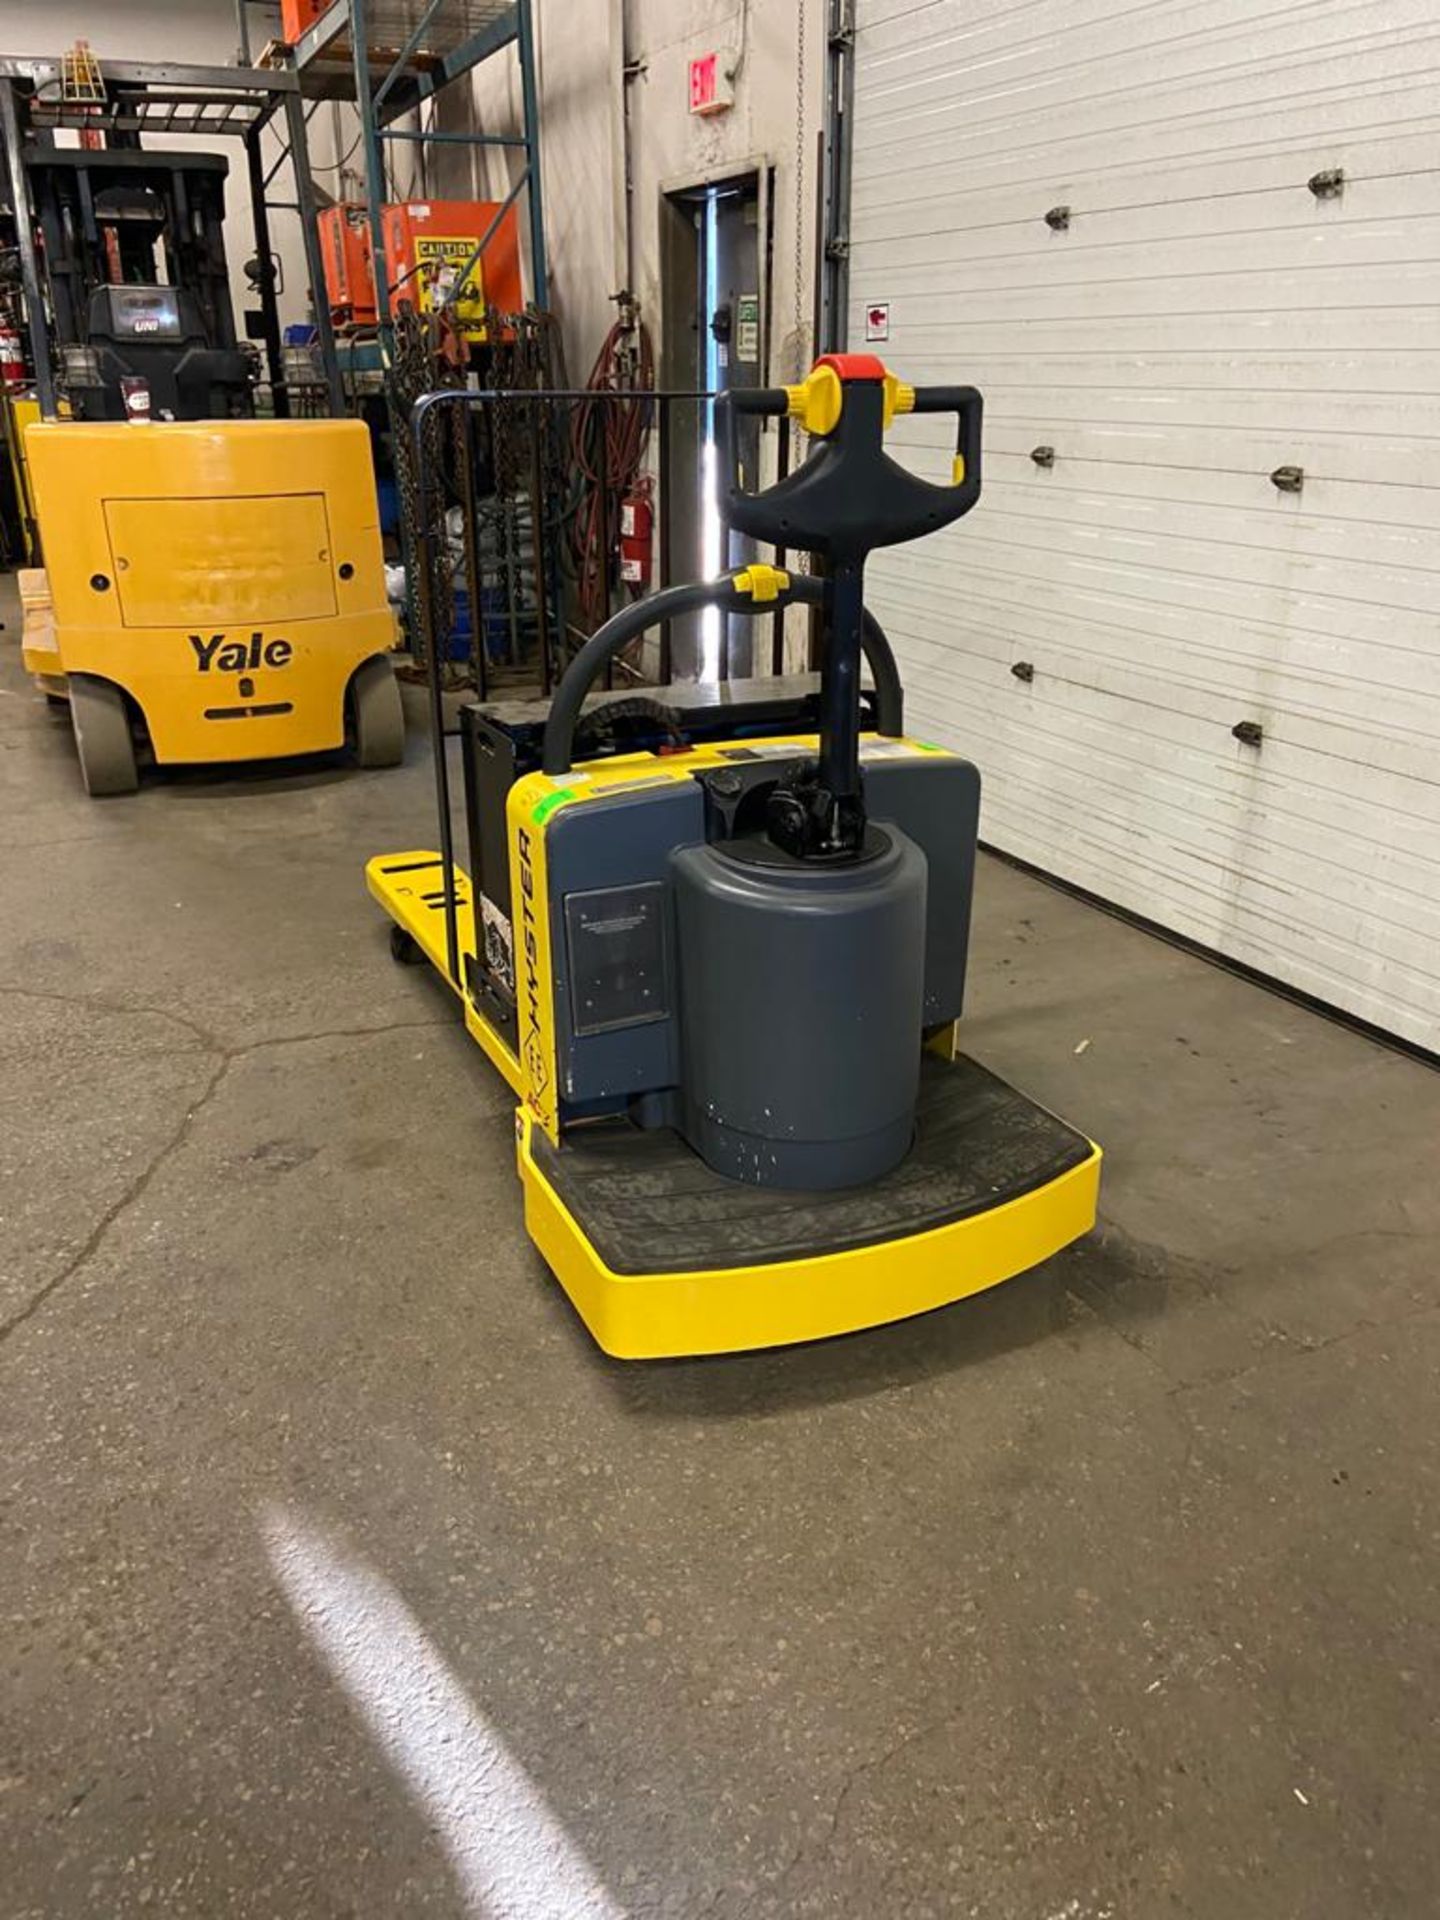 2008 Hyster RIDE ON Electric Powered Pallet Cart Walkie Lift 6000lbs capacity with VERY LOW HOURS - Image 2 of 3